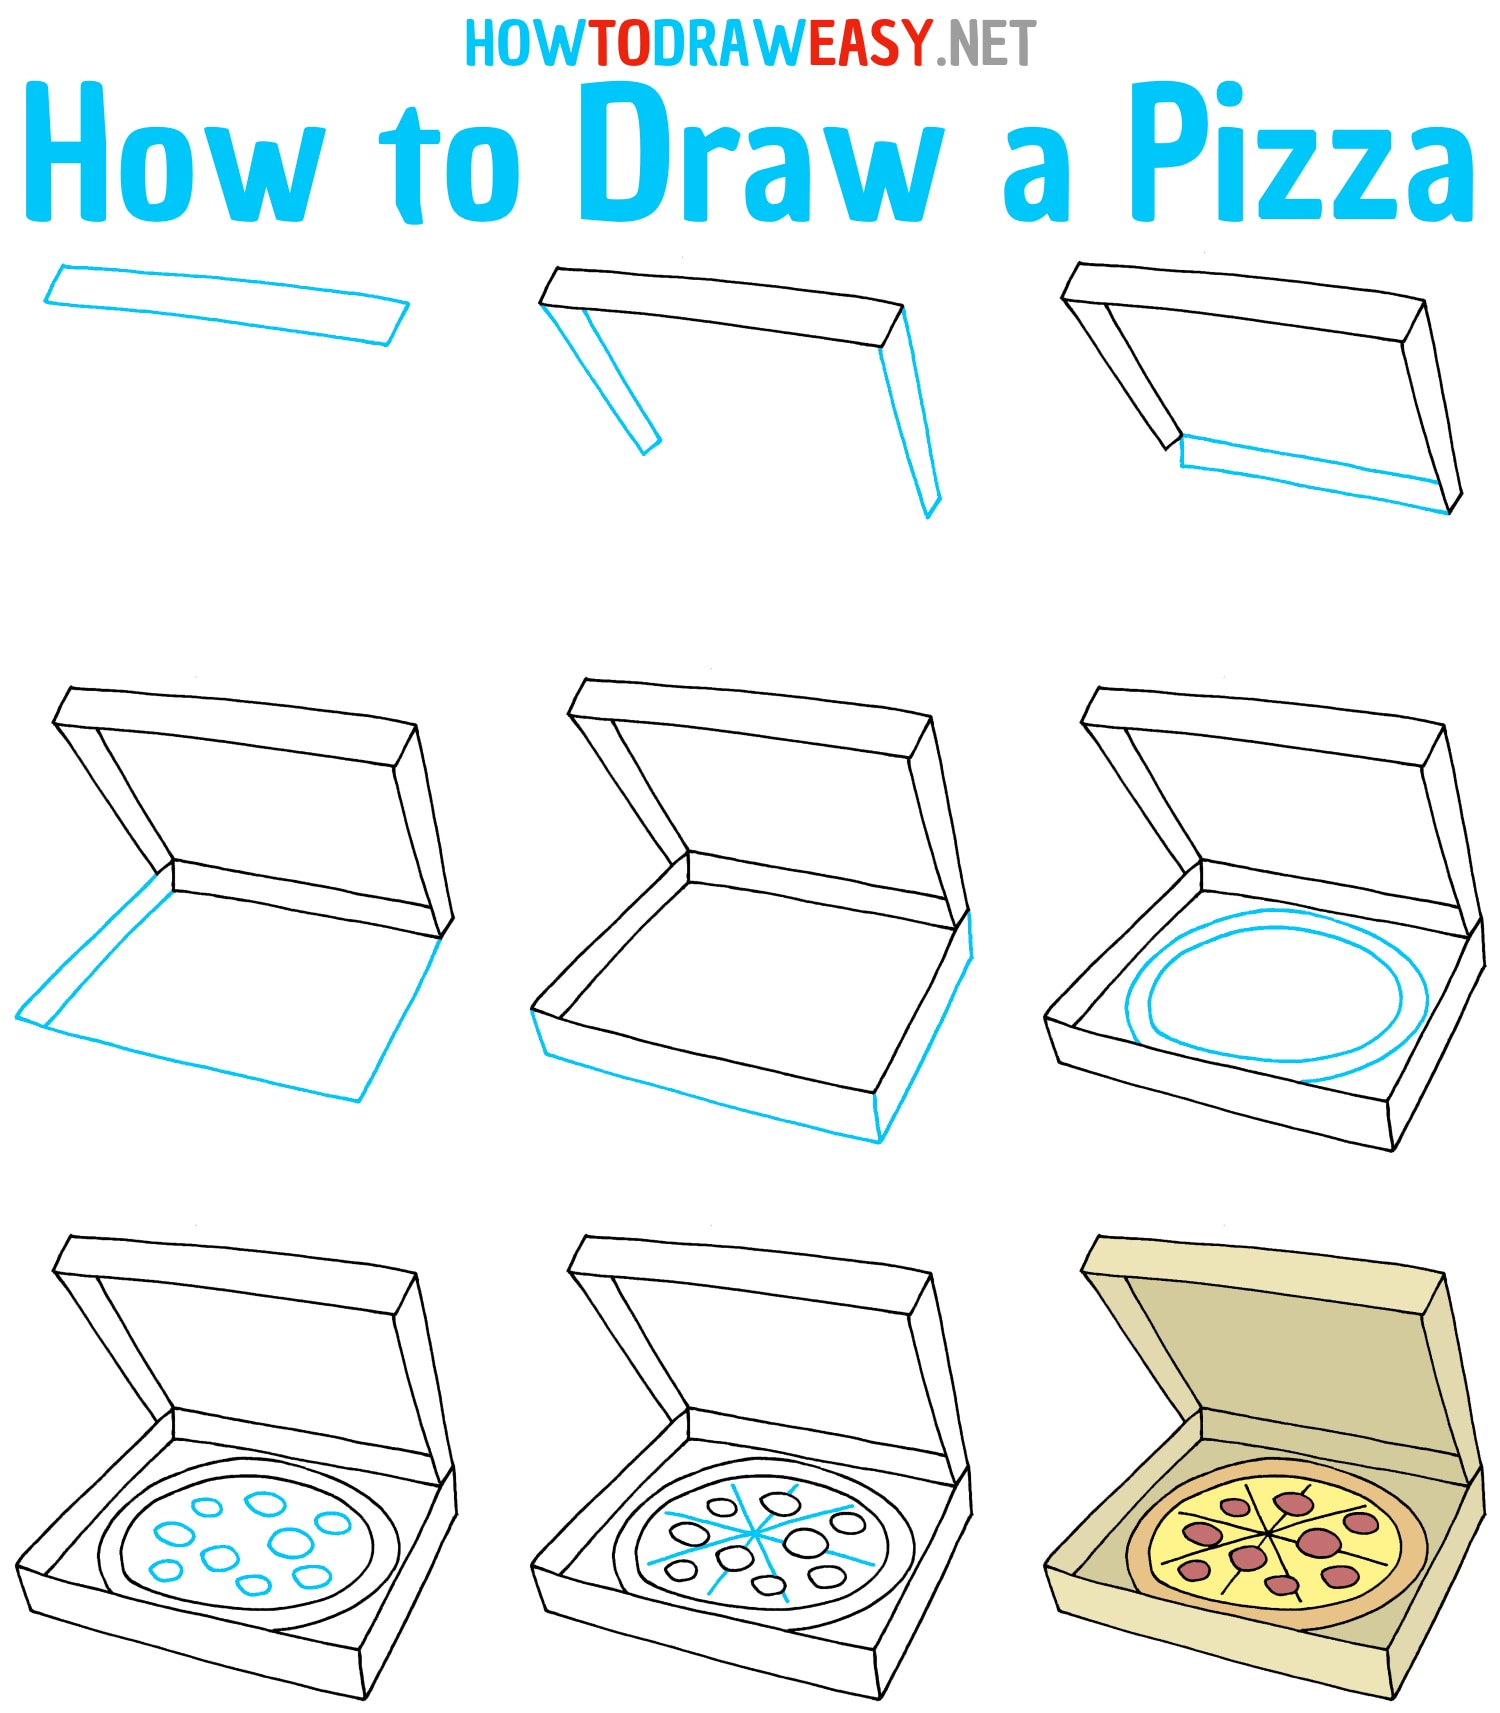 How to Draw a Pizza Step by Step